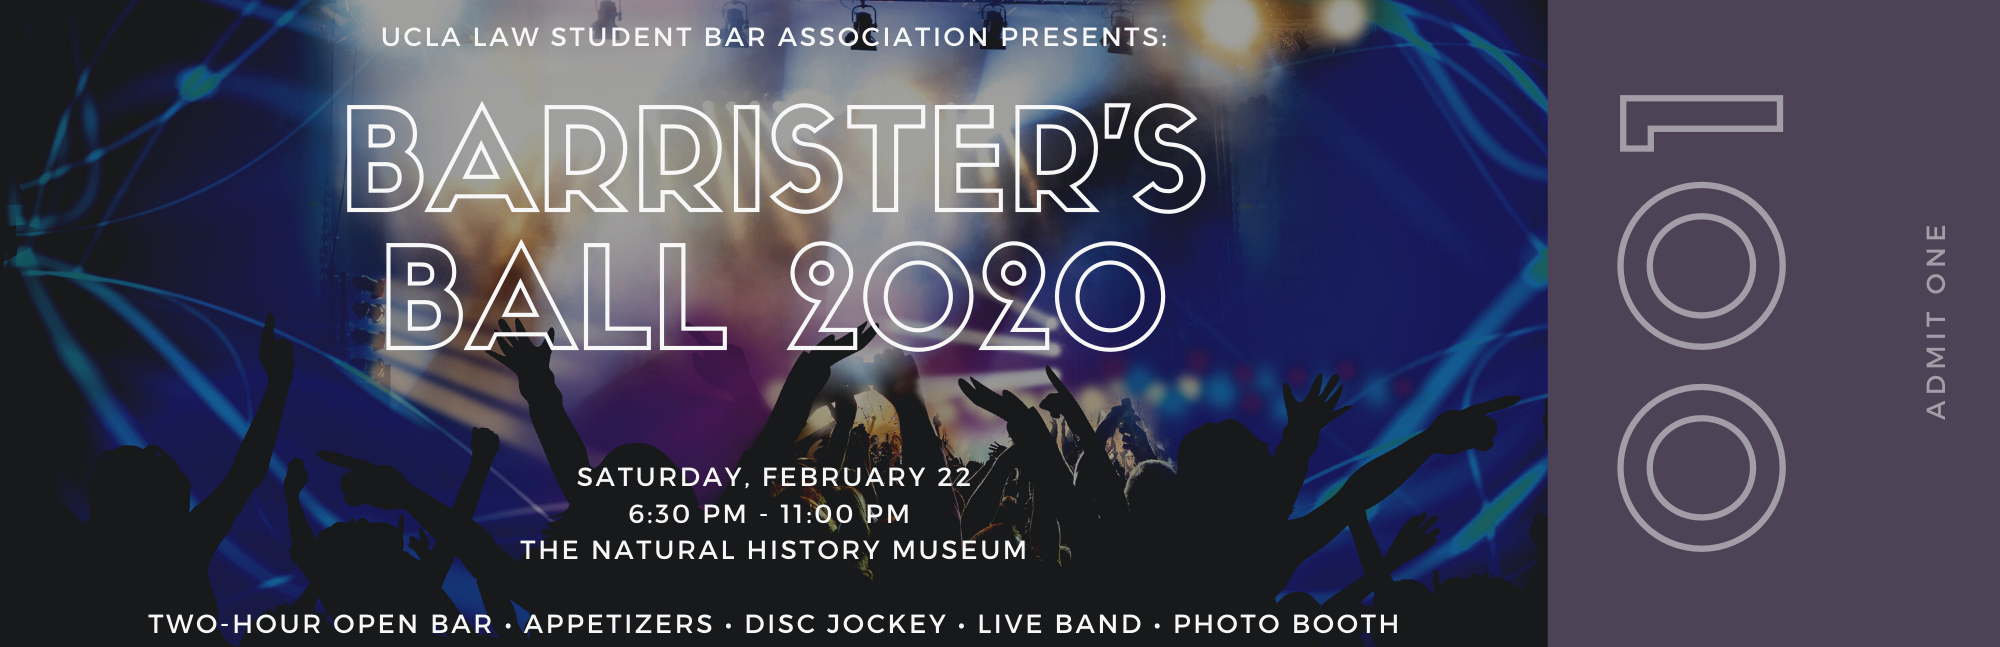 UCLA School of Law Barrister's Ball 2020